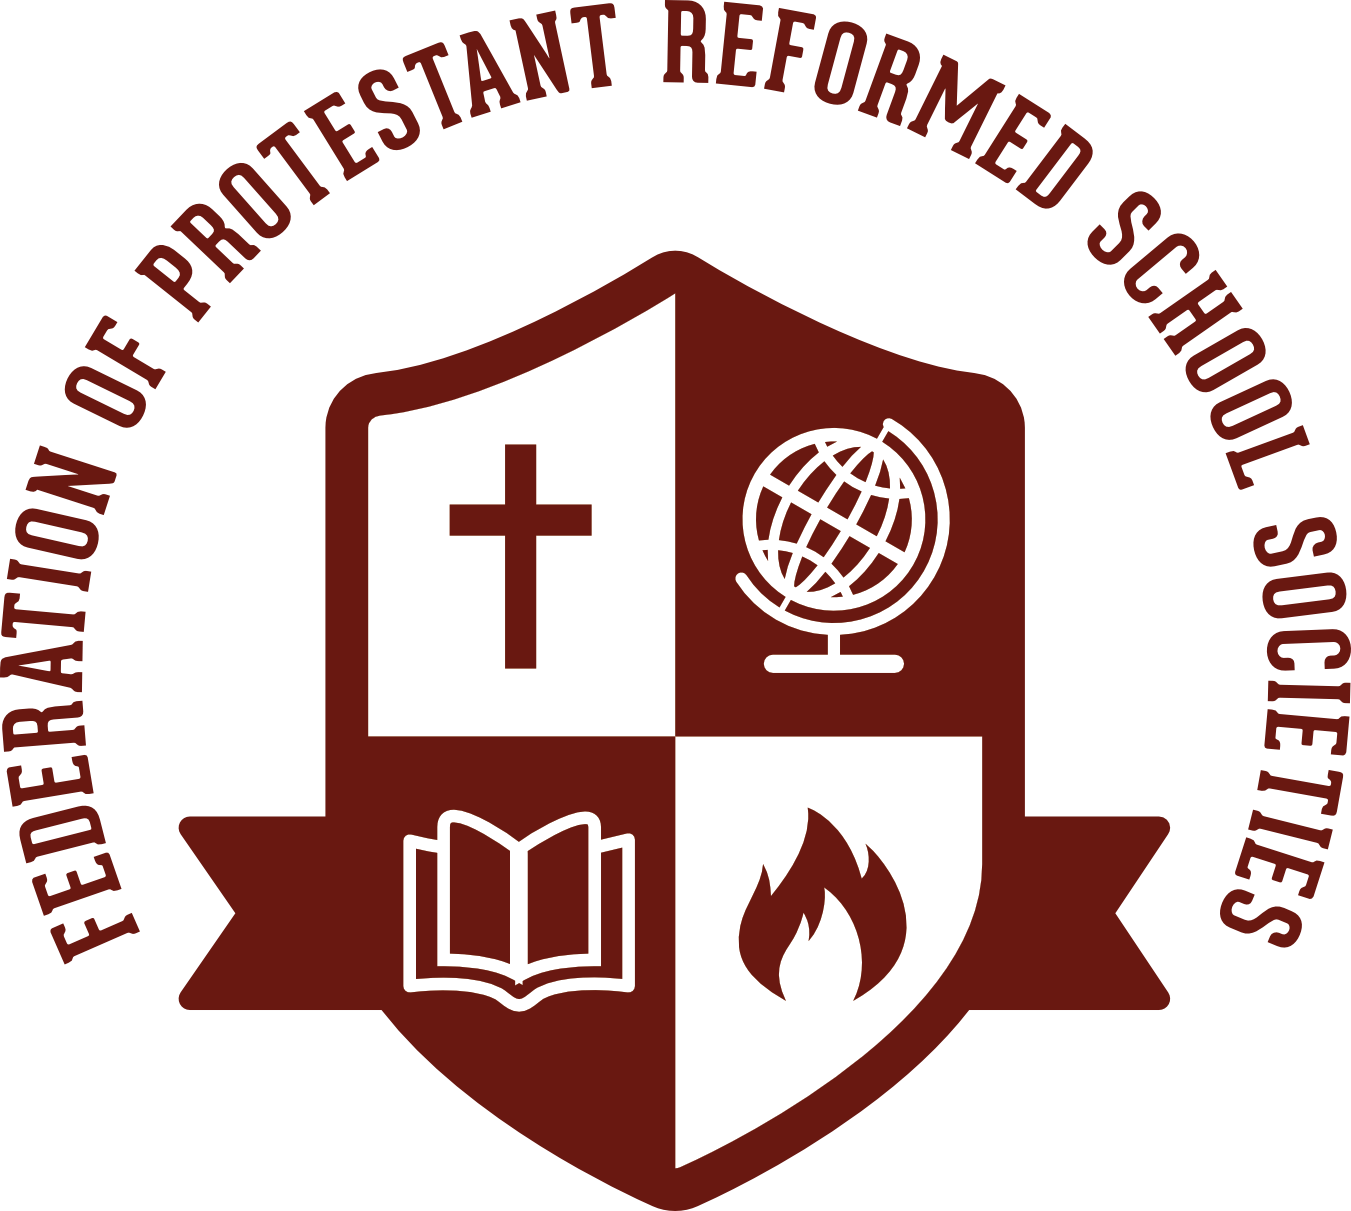 Reformed Logo - Federation. Just another WordPress site